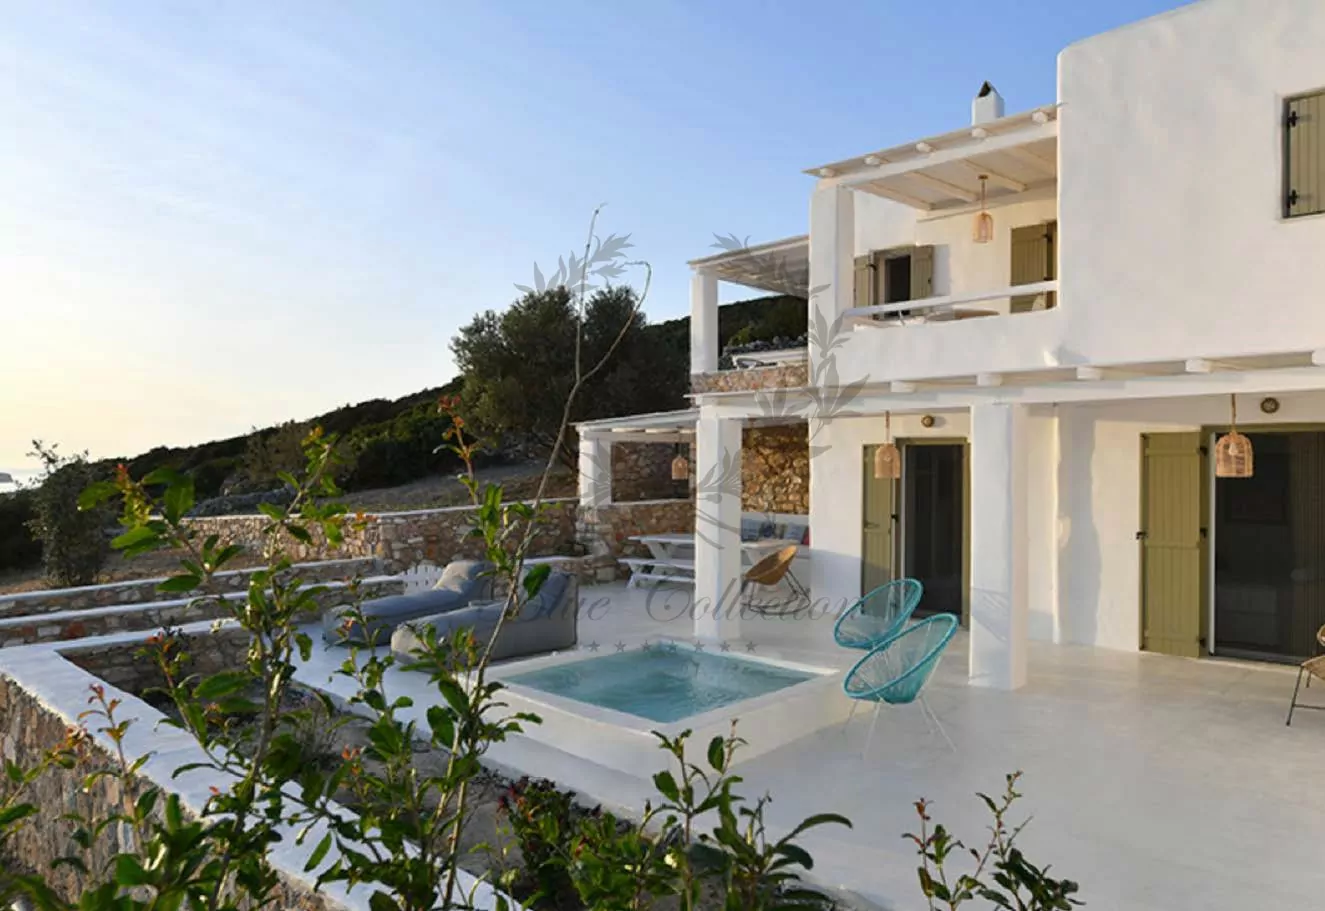 Private Villa for Rent in Paros - Greece | Shared Pool | Sea & Sunset View | Sleeps 4 | 2 Bedrooms | 2 Bathrooms | REF: 180412267 | CODE: PRC-1